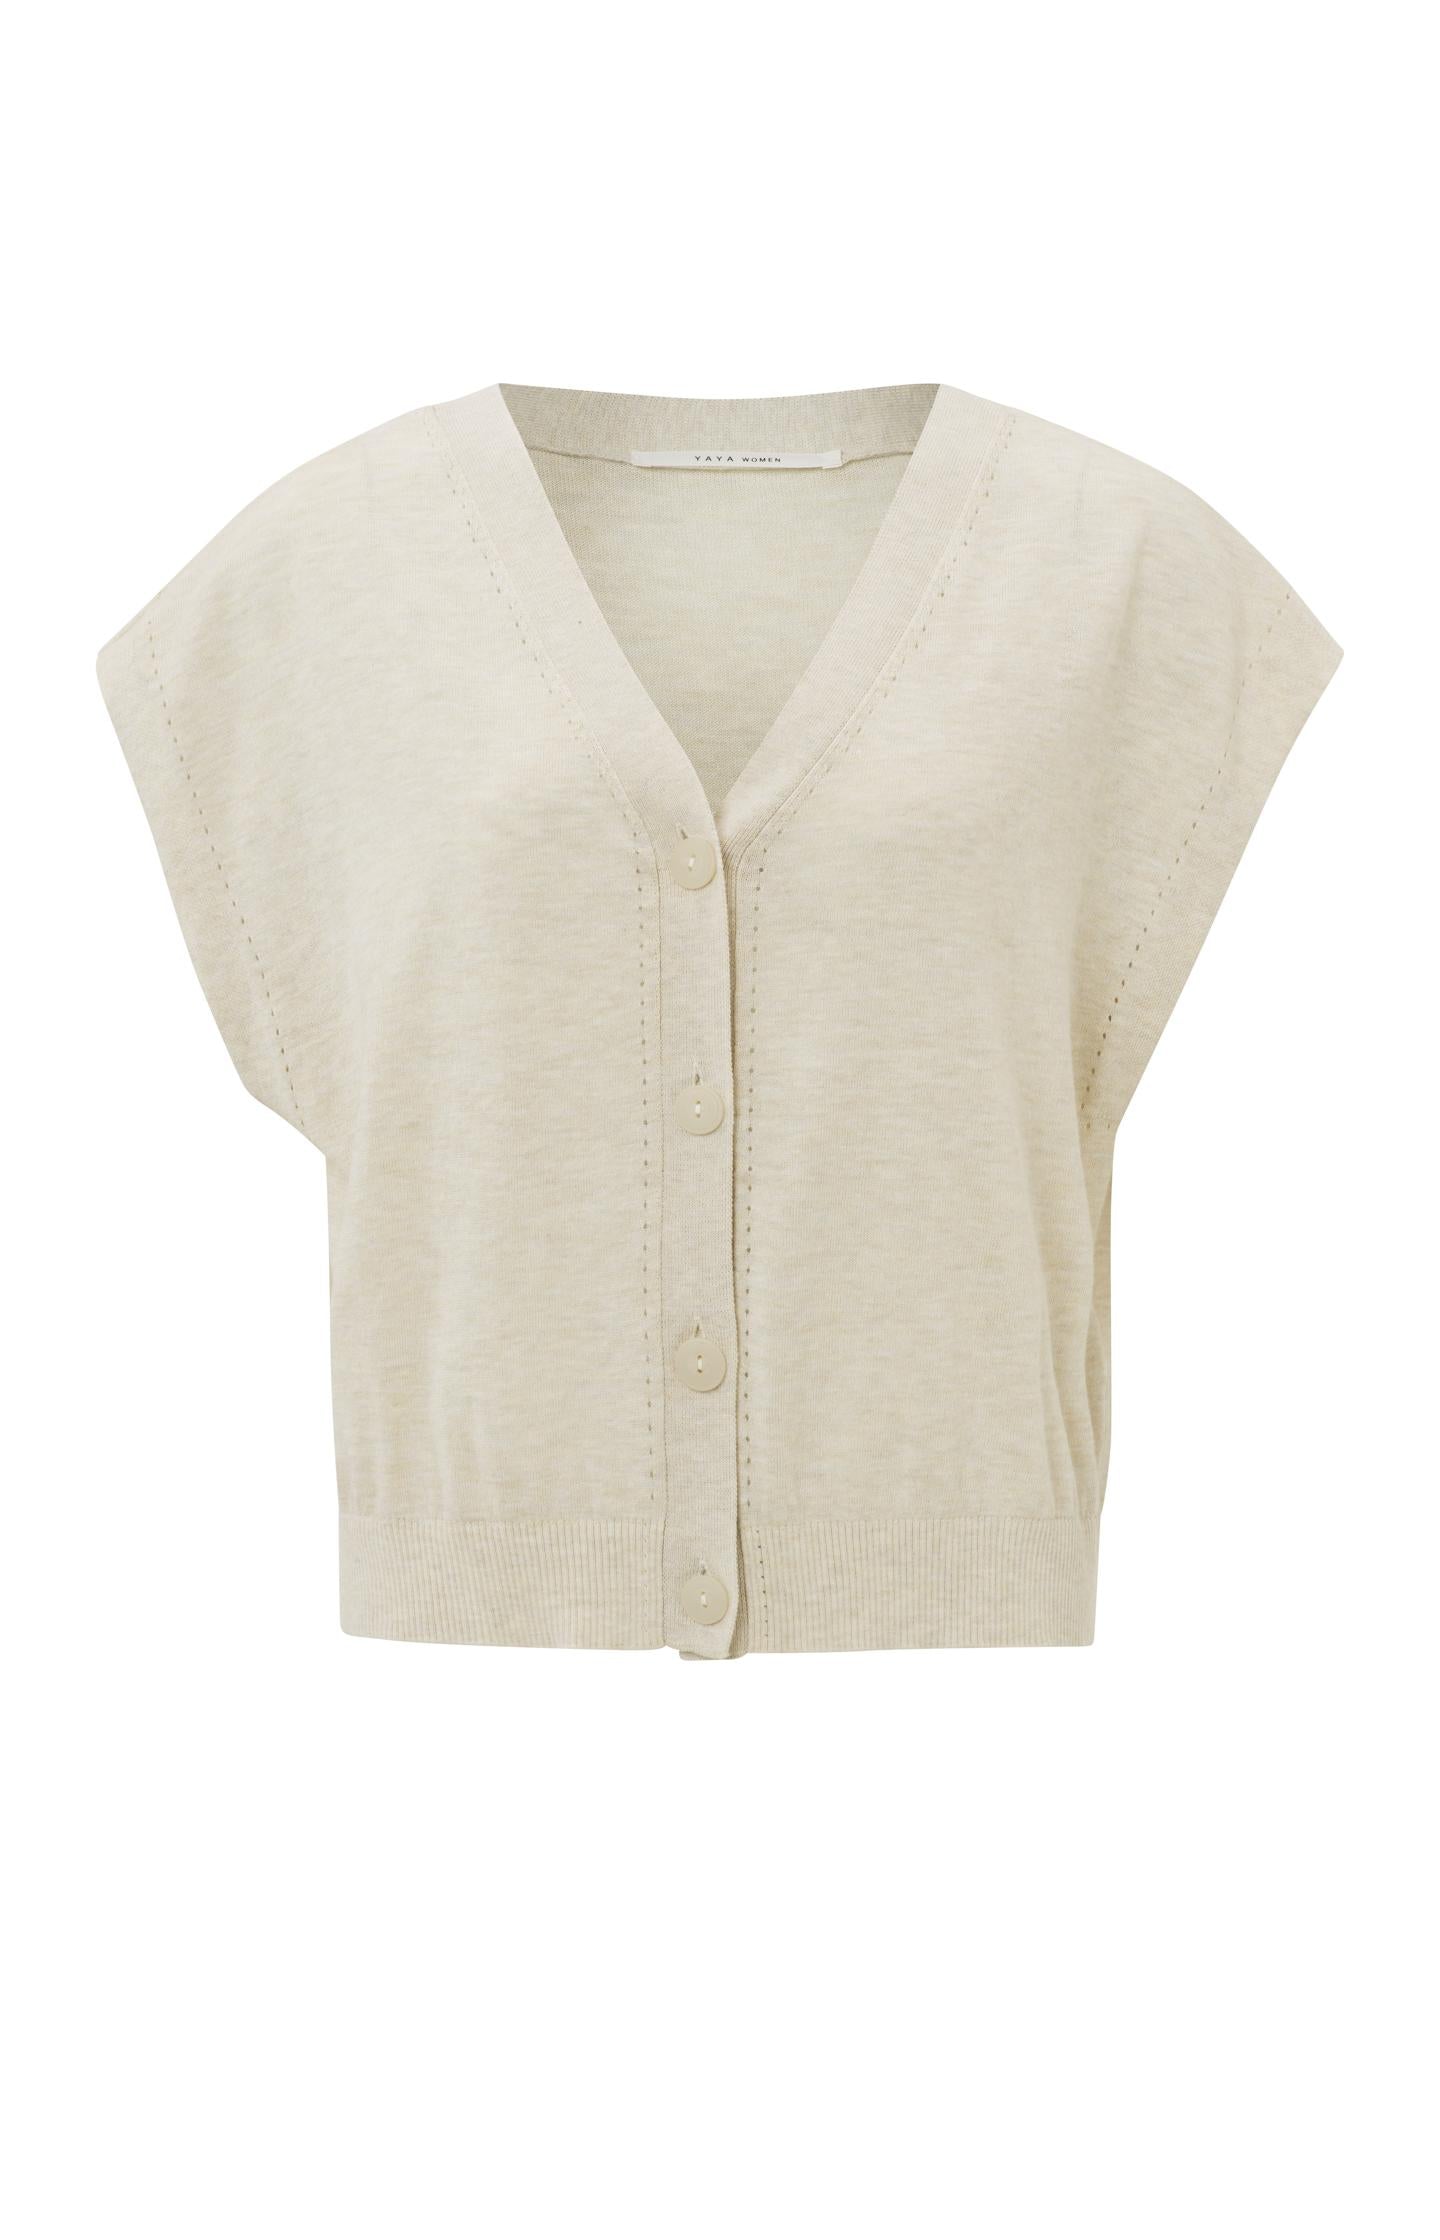 Sleeveless cardigan with V-neck, buttons and stitched detail - Type: product